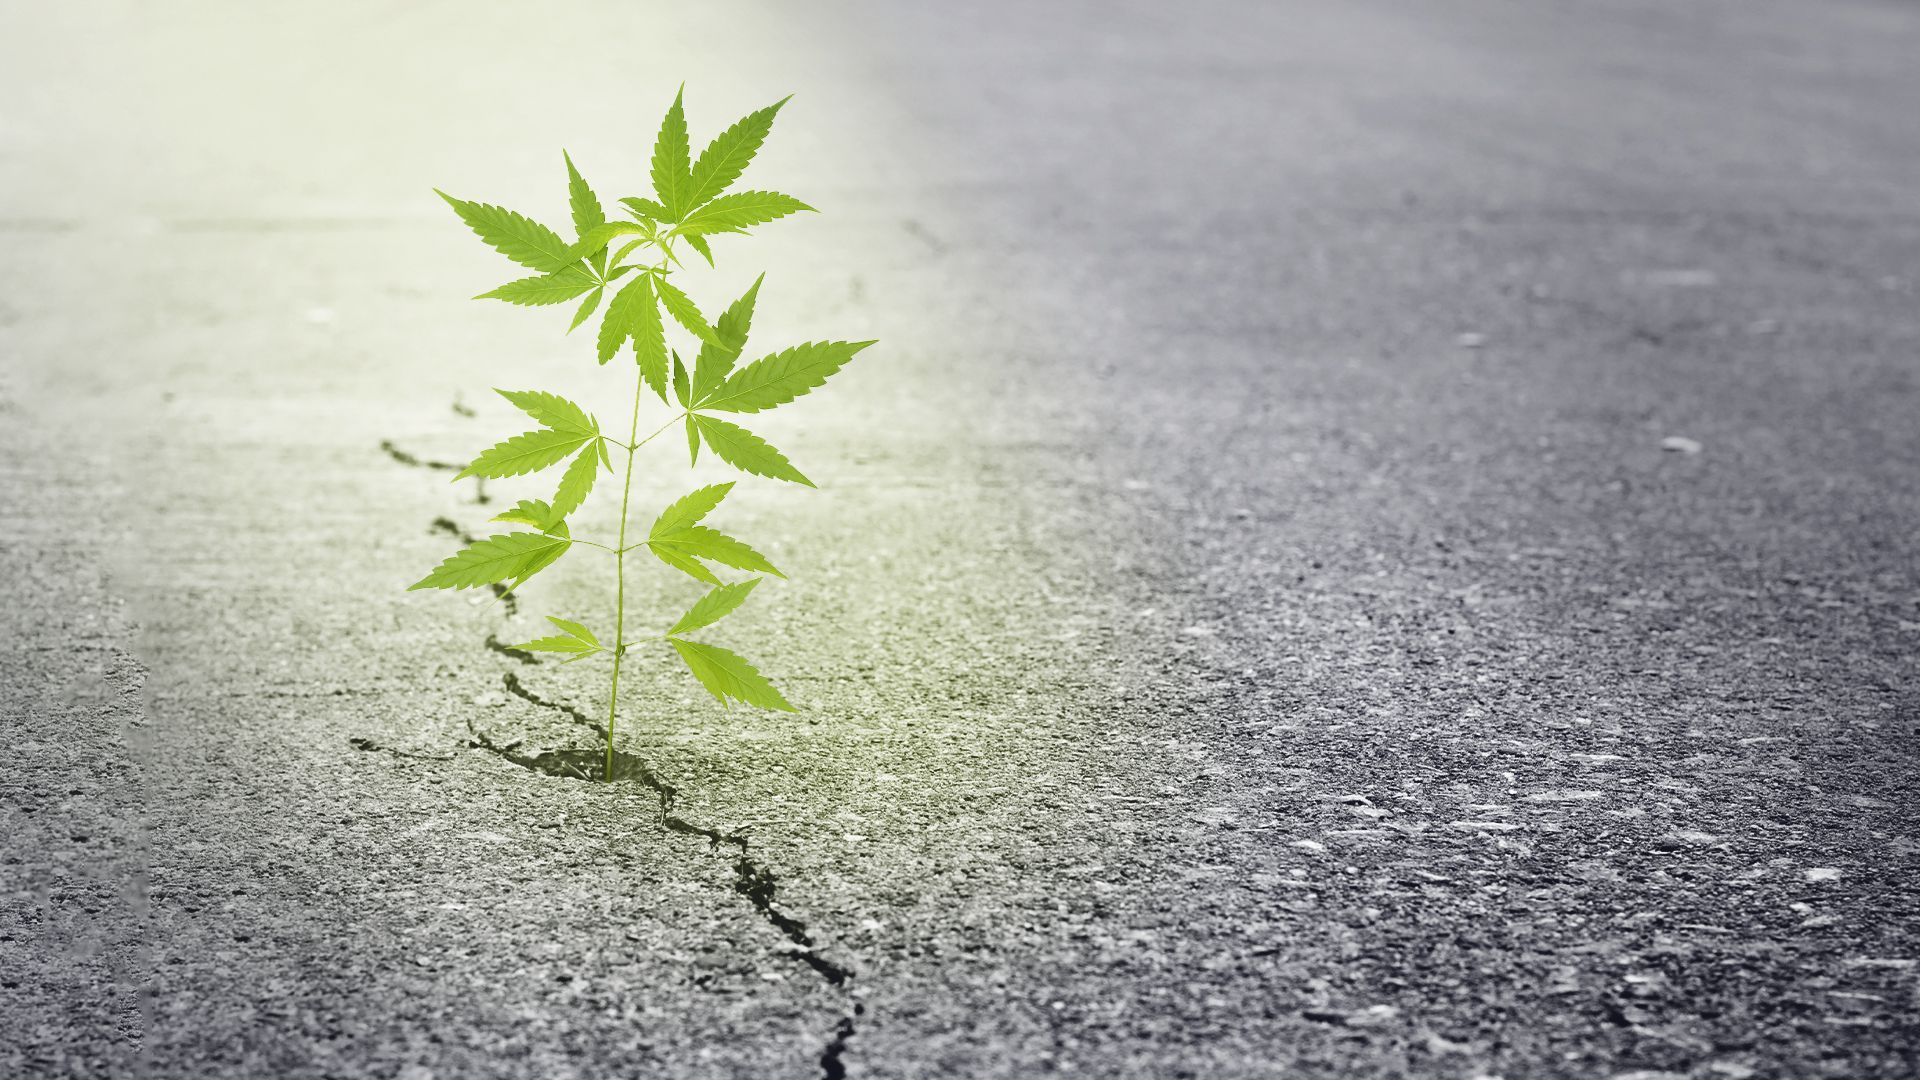 Illustration of a cannabis plant sprouting through a crack in pavement